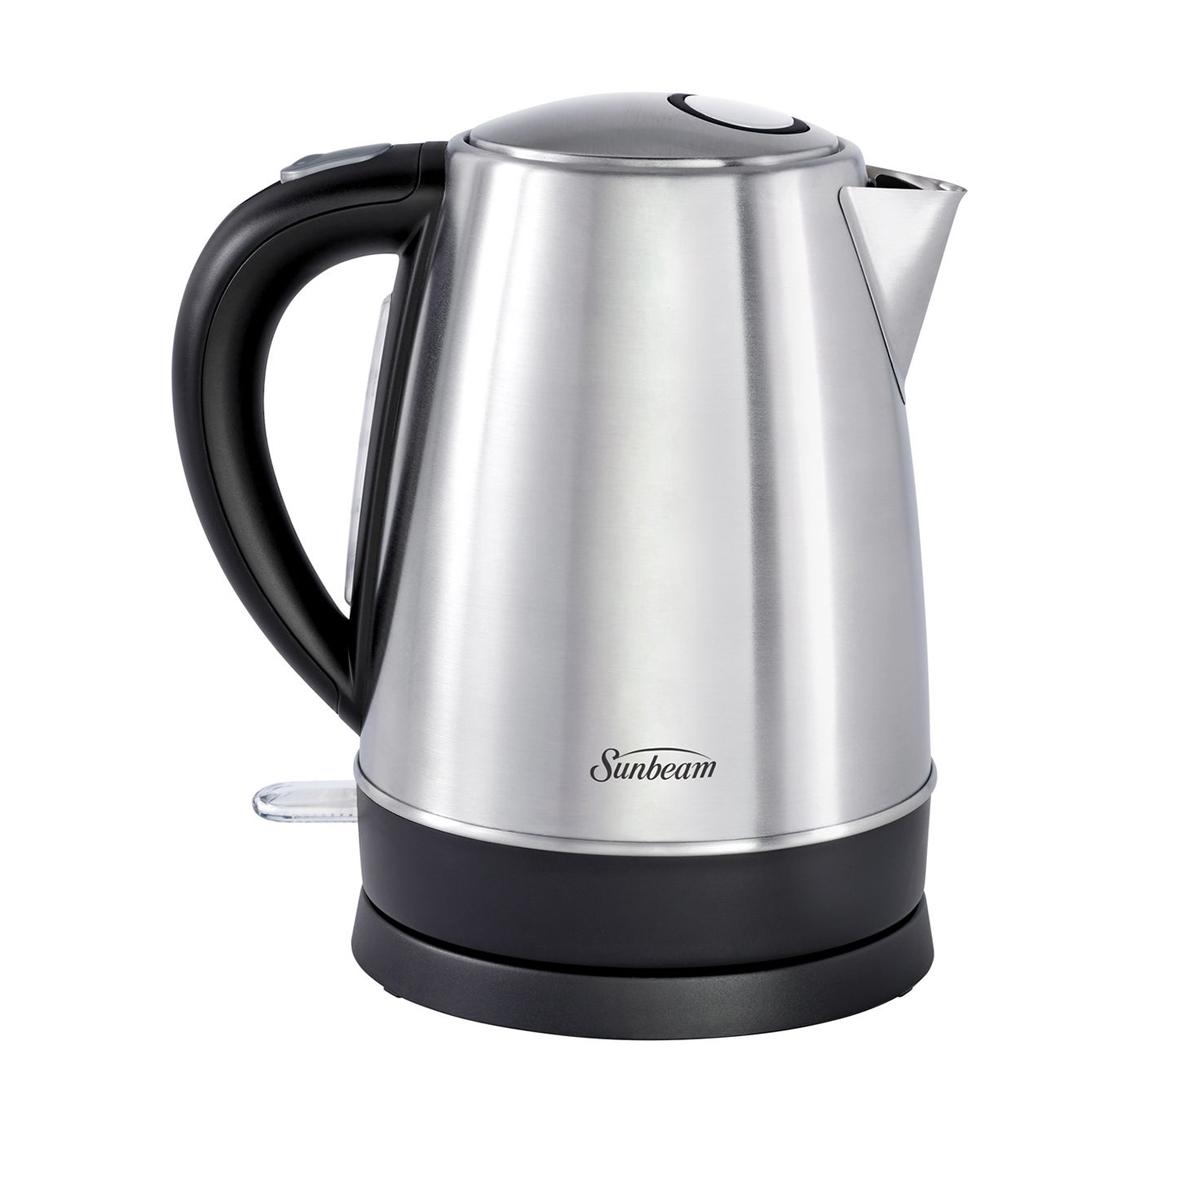 Electric Cordless Kettle 1.7L - Stainless Steel